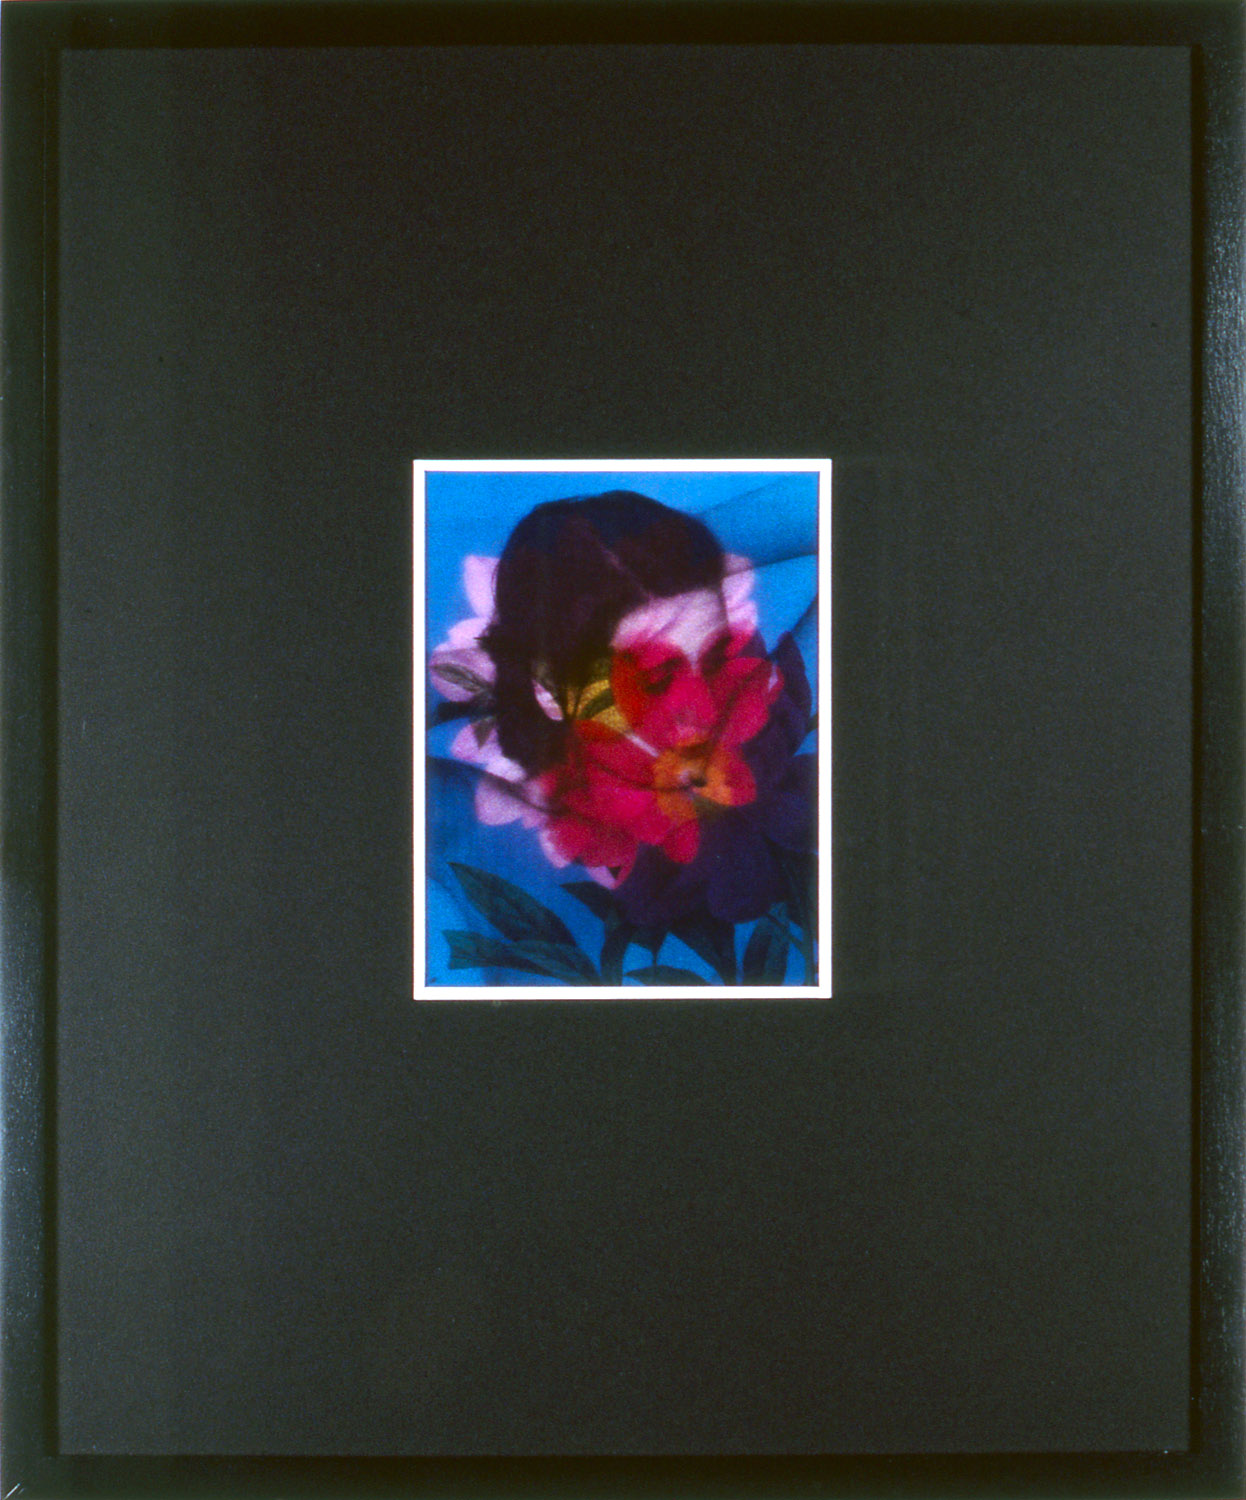   Woman As Object 2 , 1995, 17 1/4 x 14 1/2", mixed media with frame. 